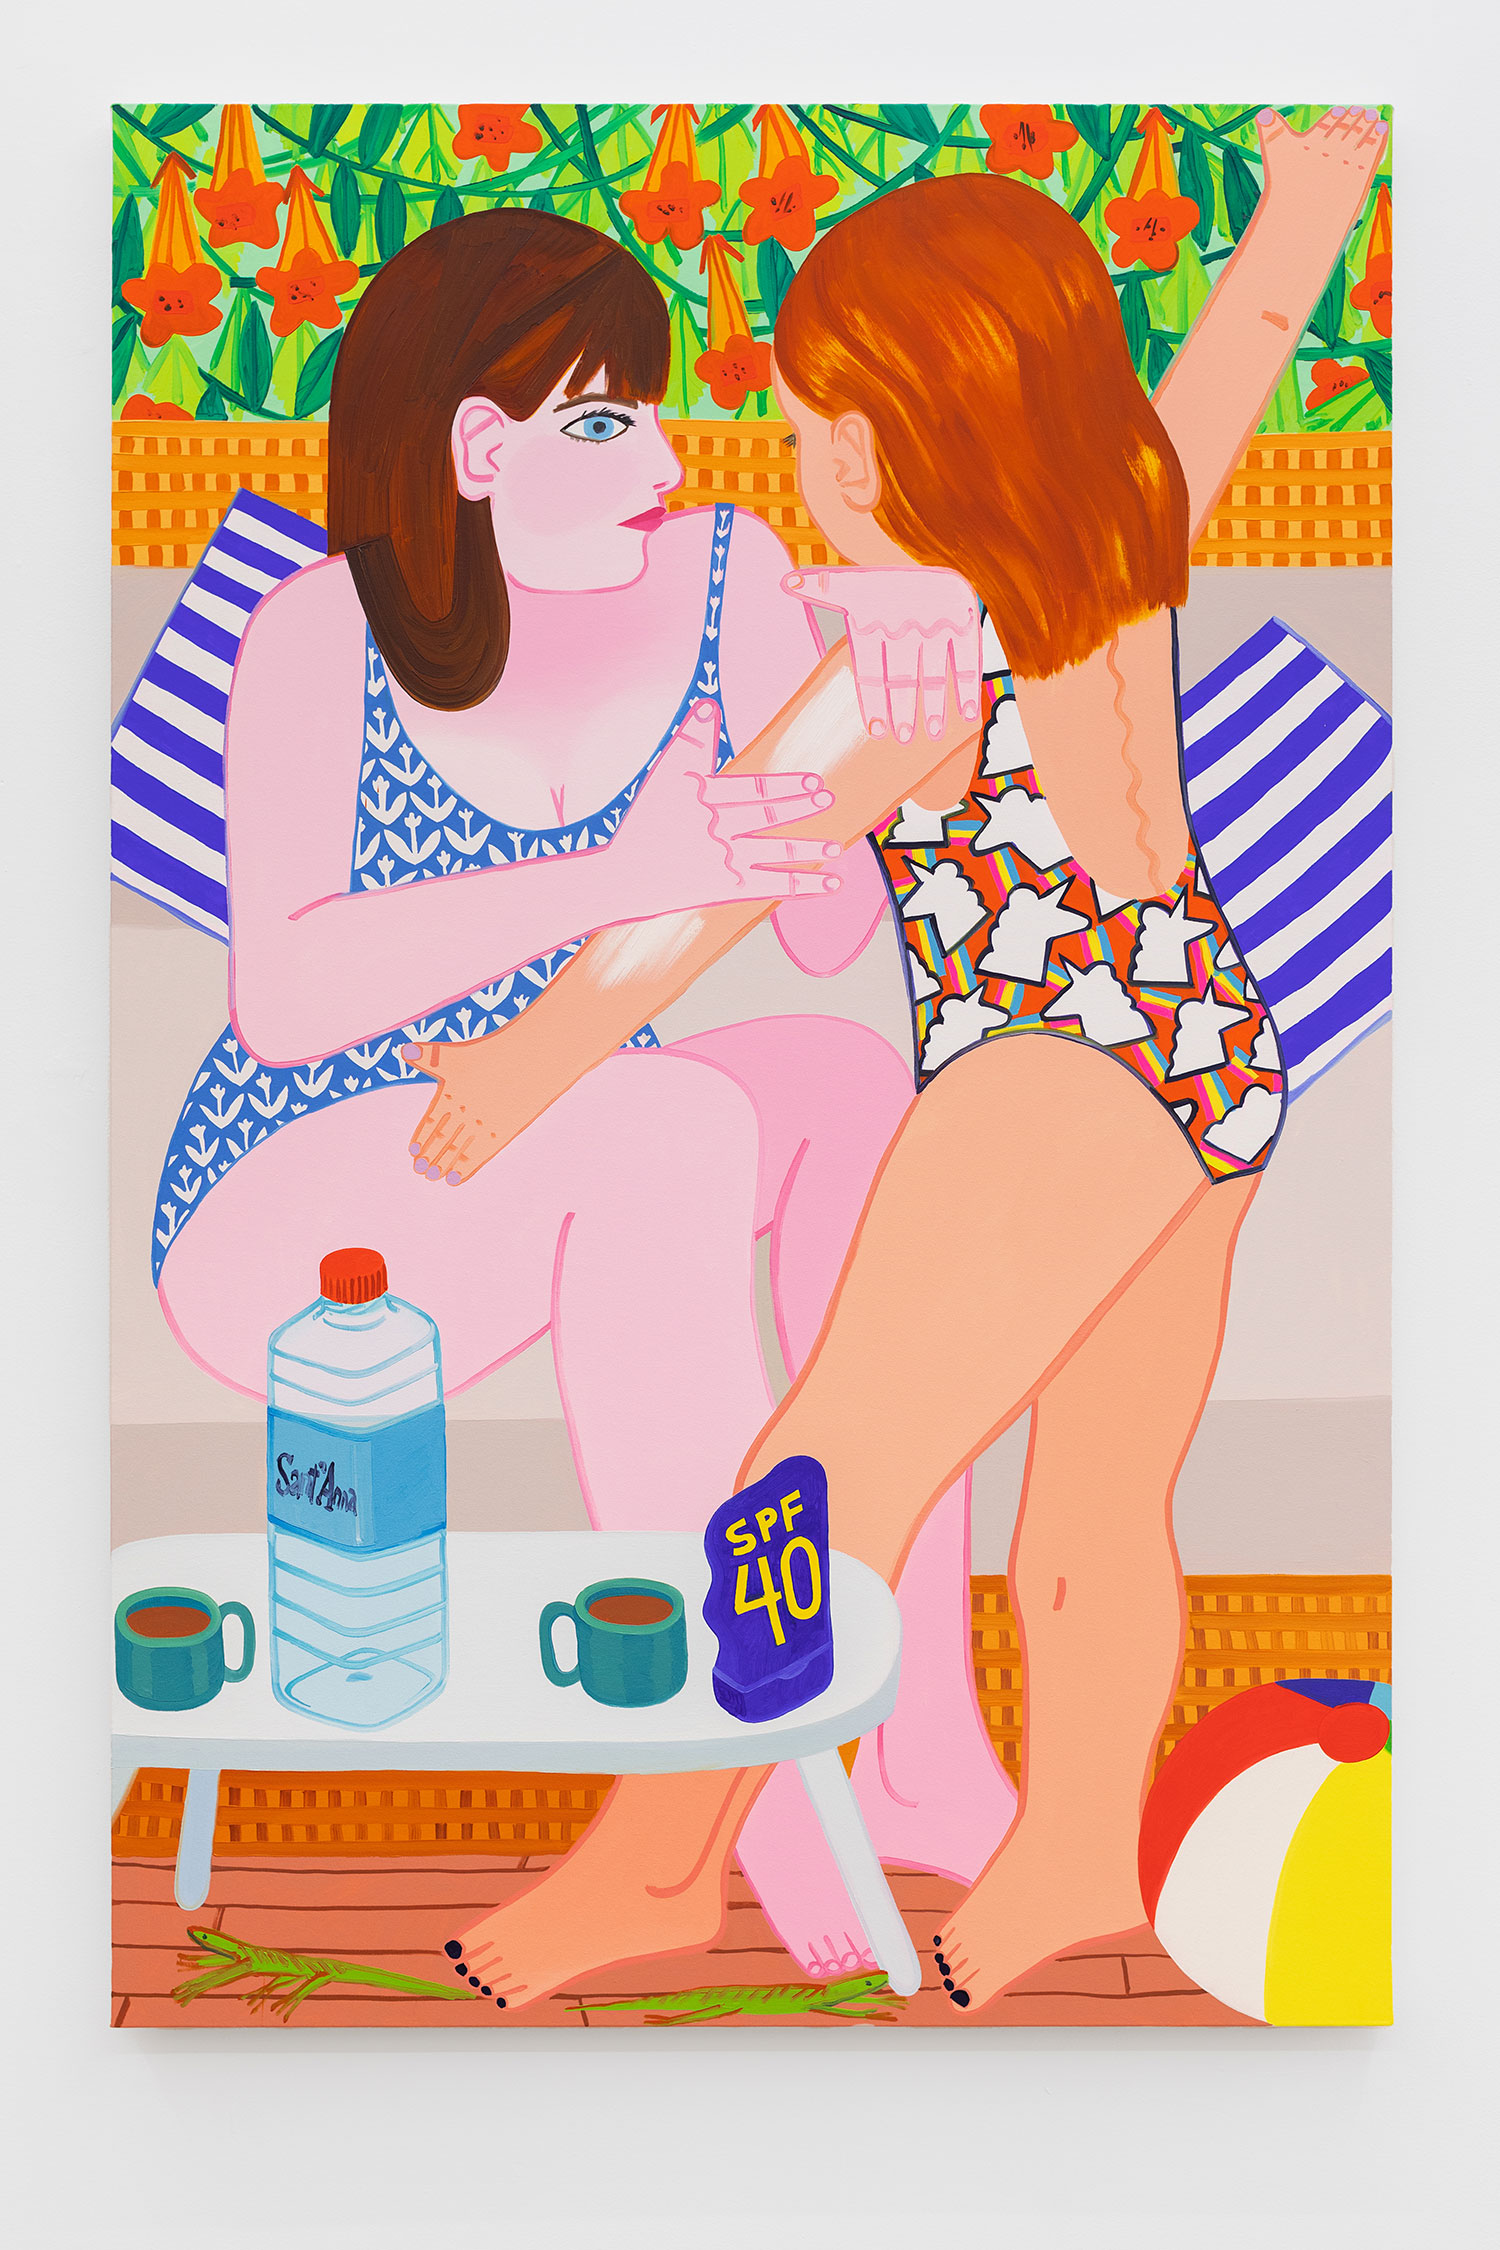 Overall image of Madeline Donahue's "Sunscreen." "Sunscreen" depicts a mother applying sunscreen to her daughter.